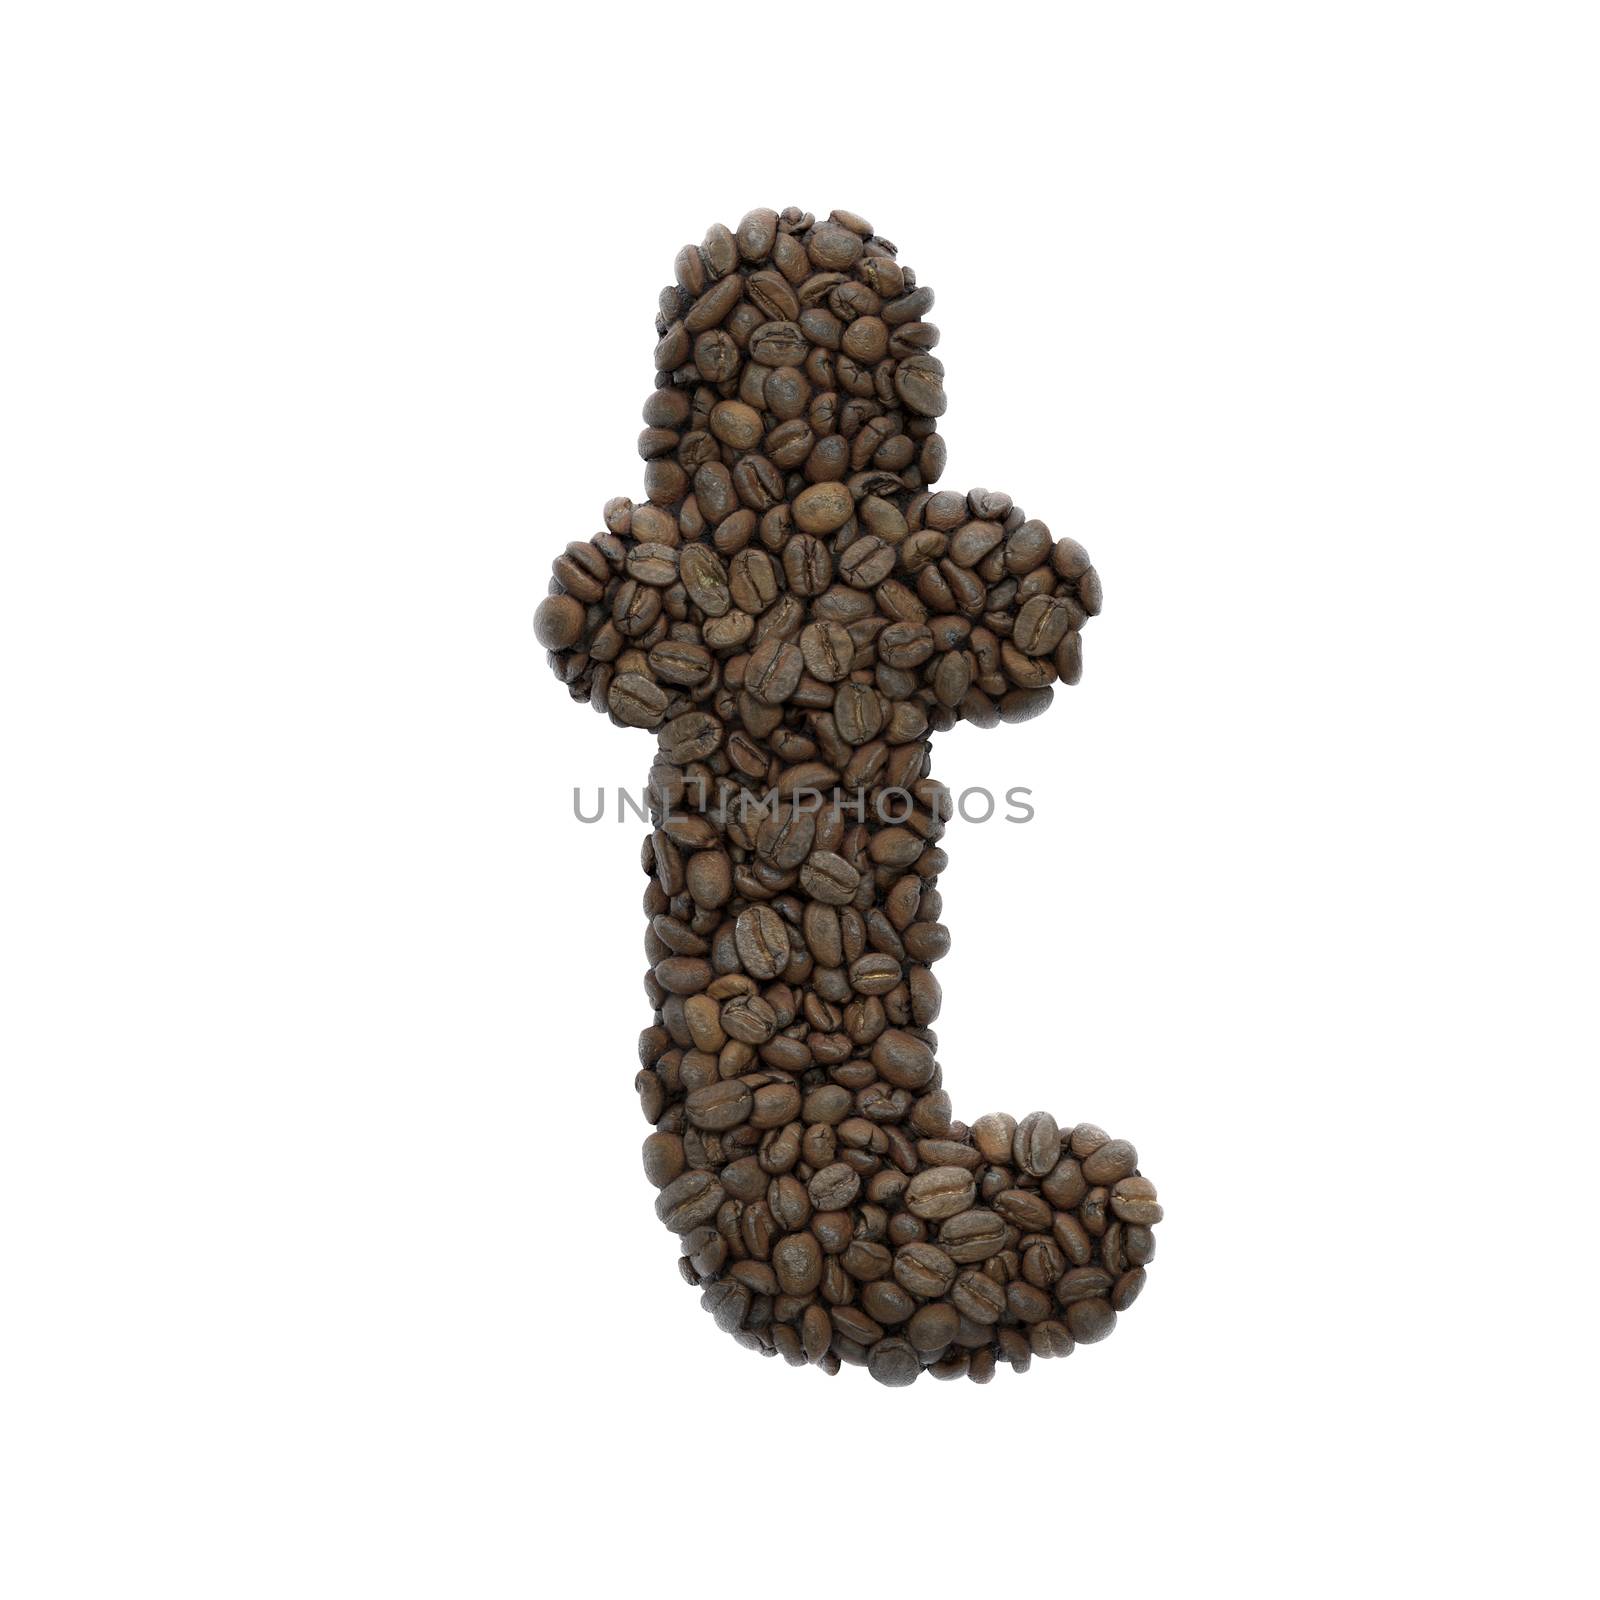 Coffee letter T - Lower-case 3d roasted beans font - Suitable for Coffee, energy or insomnia related subjects by chrisroll